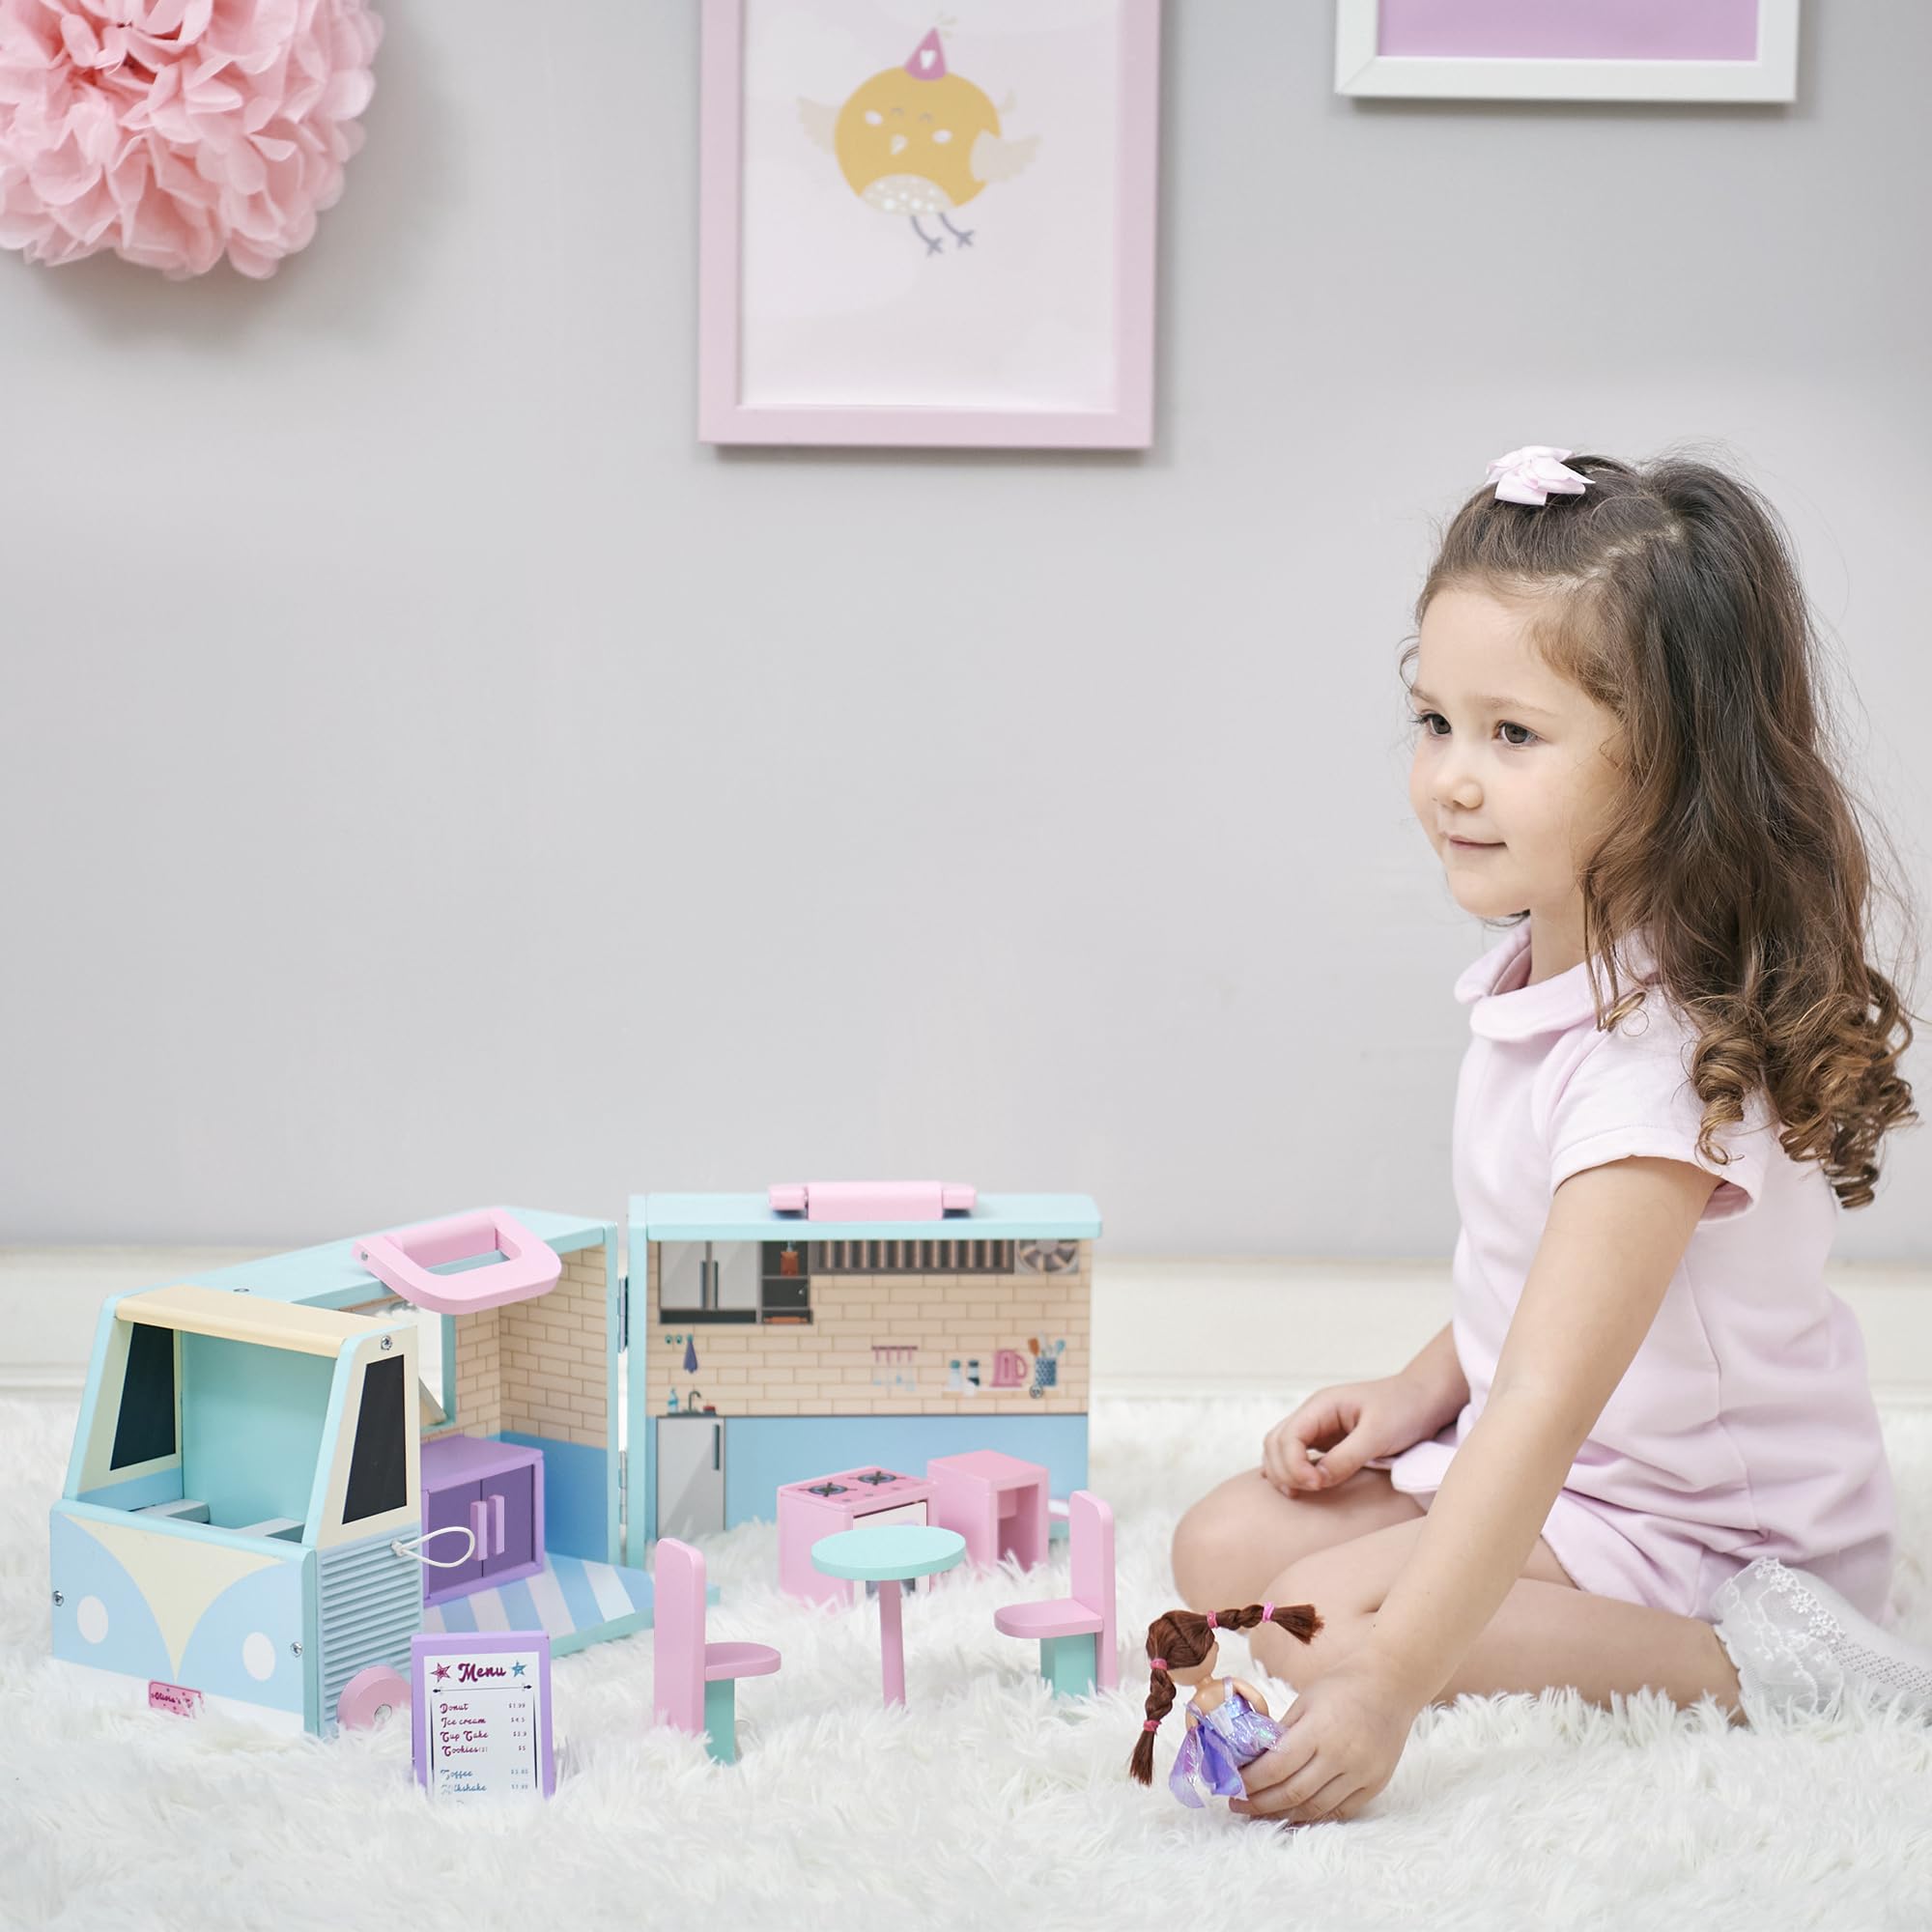 Olivia's Little World - Fold and Go Wooden Dollhouse, Cafe Portable Food Truck Dollhouse Playset, Pretend Play with 8 Accessories in 2-Way Play, Pretend Play Portable Toy Gift Set, Blue/Pink, Ages 3+